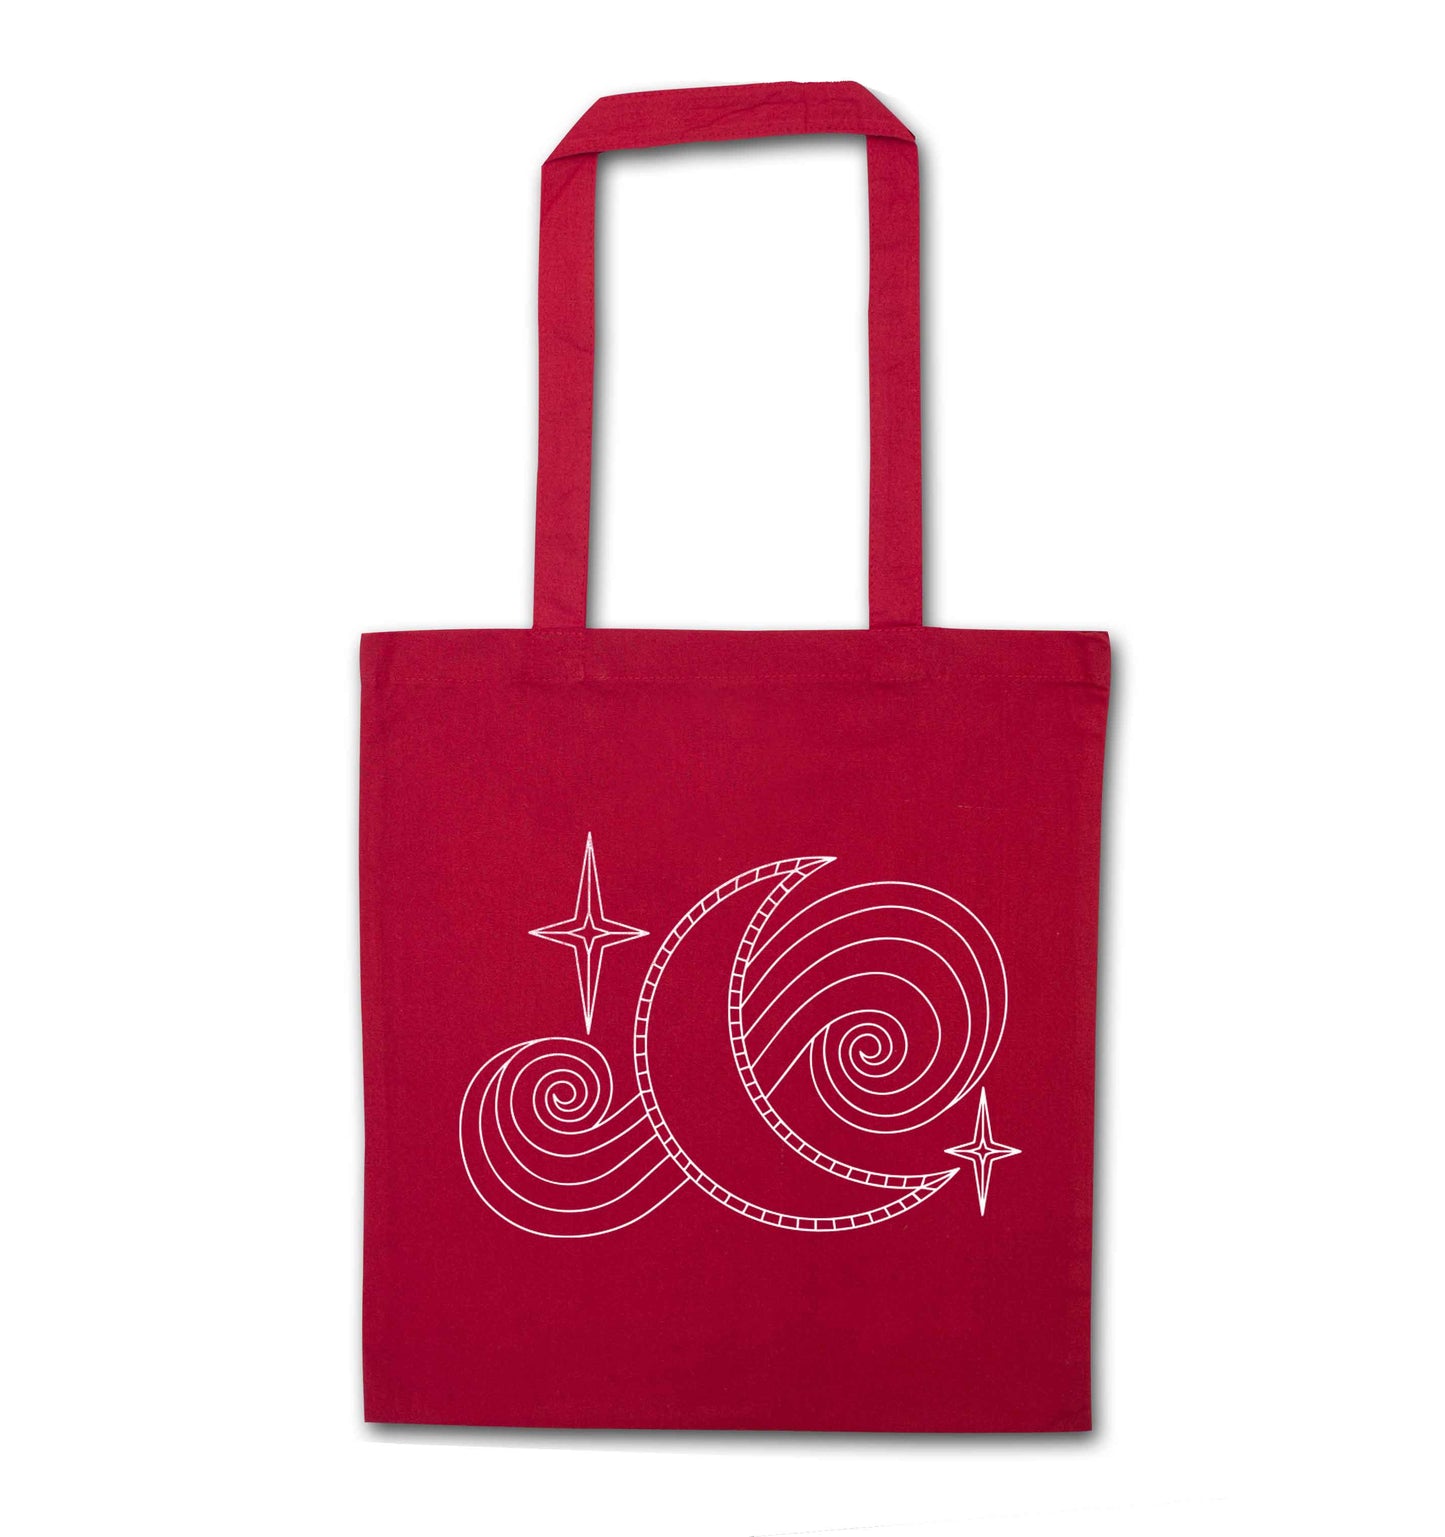 Moon and stars illustration red tote bag